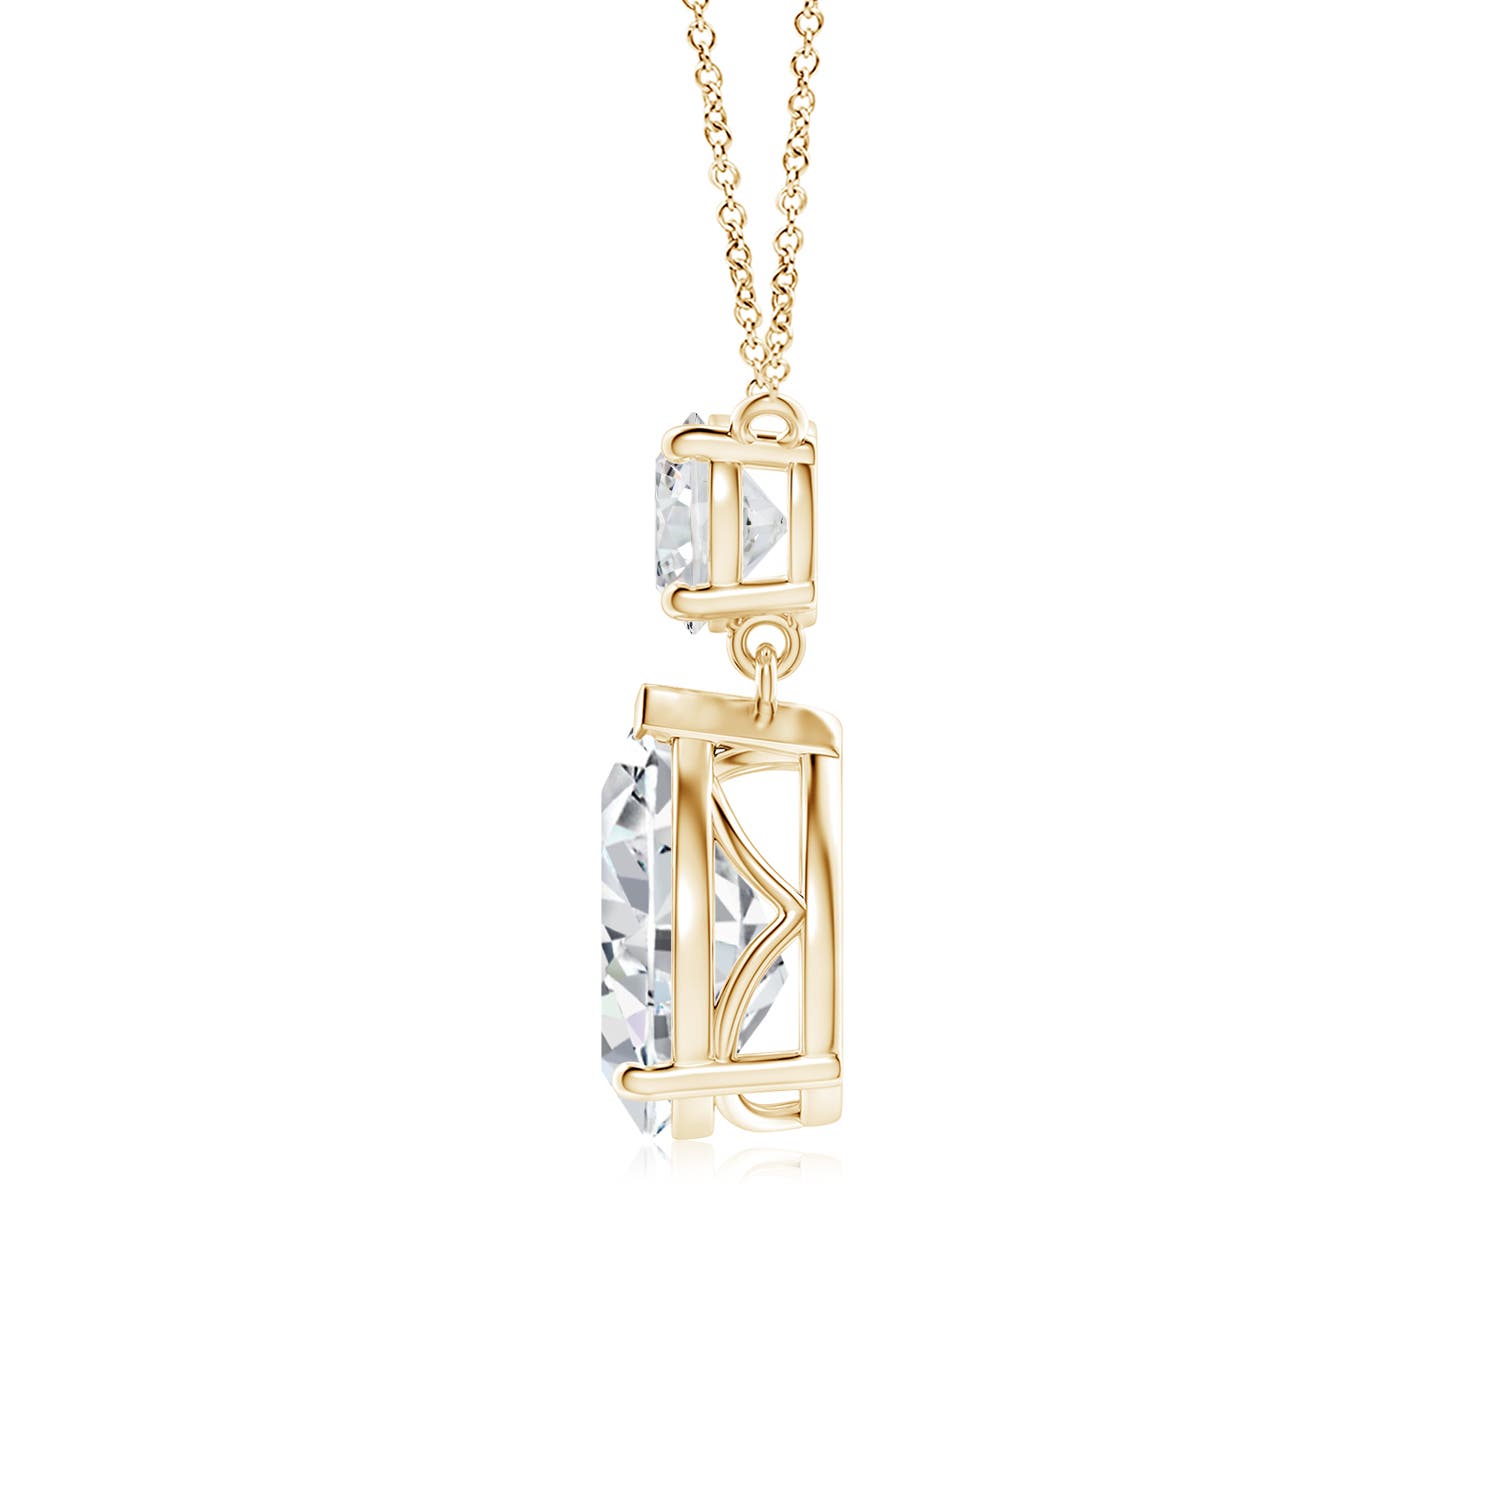 H, SI2 / 2.5 CT / 14 KT Yellow Gold